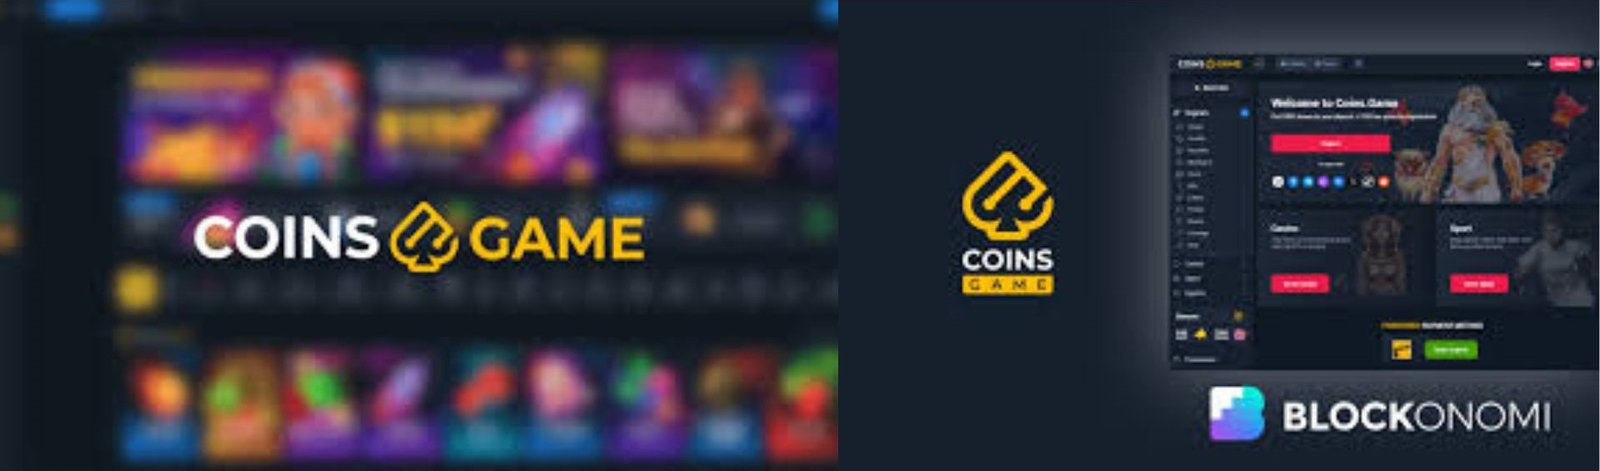 coins game casino